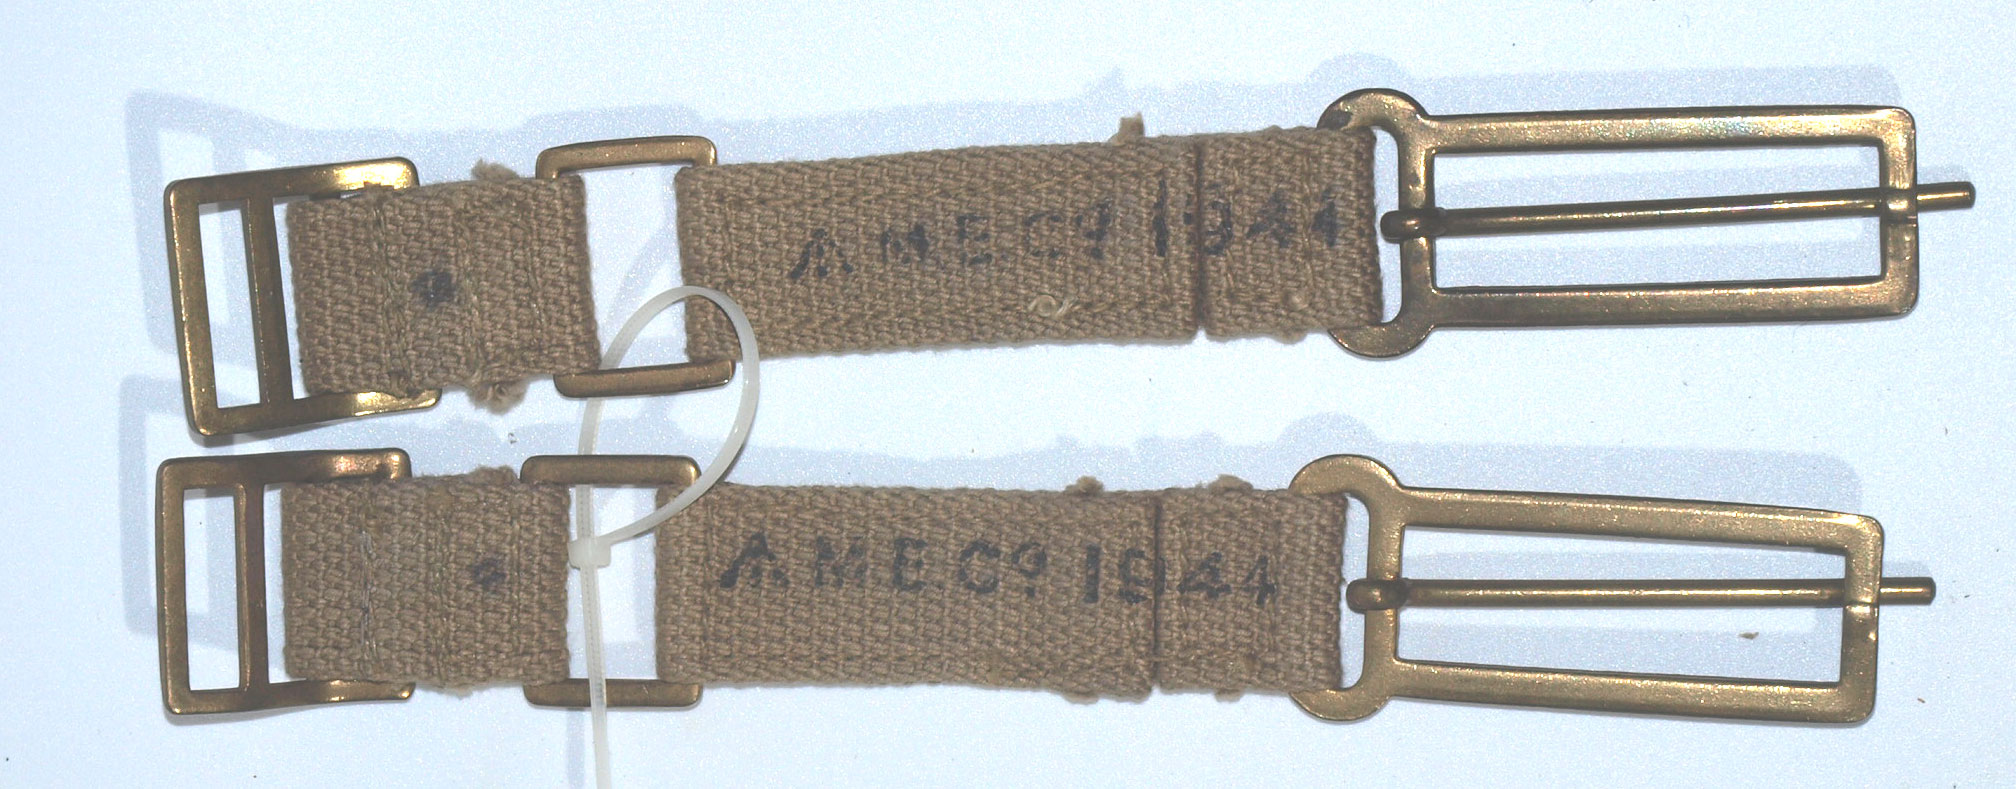 37 Pattern Brace (Strap) Attachments-matching pair dated 1944